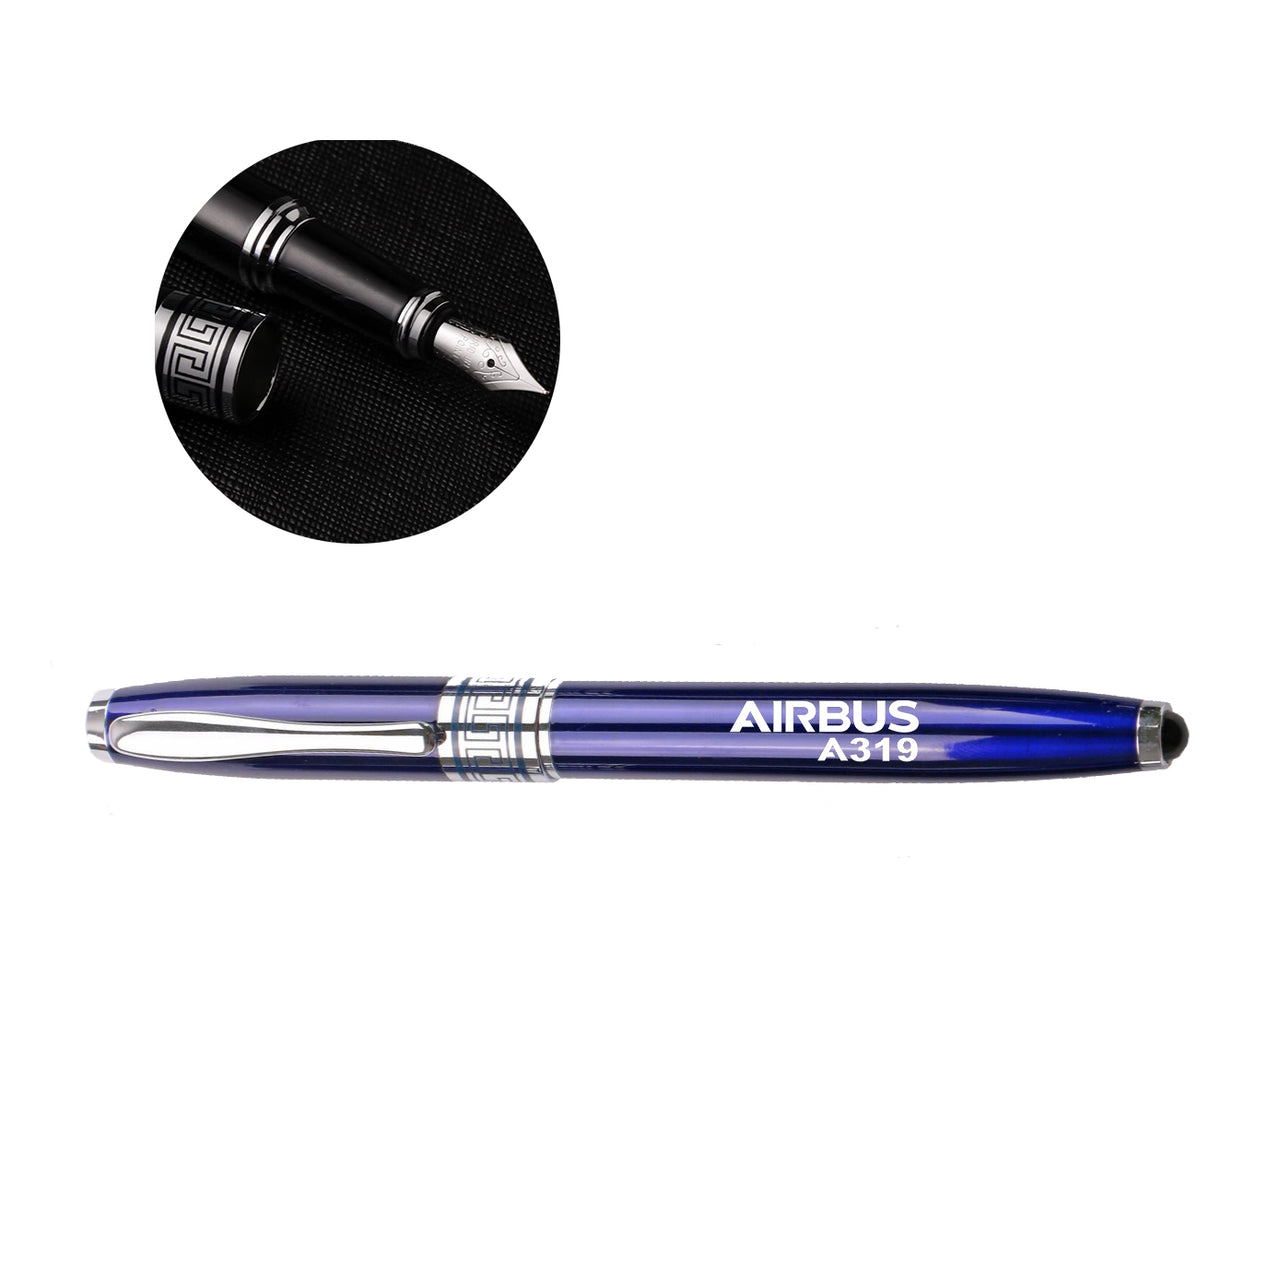 Airbus A319 & Text Designed Pens